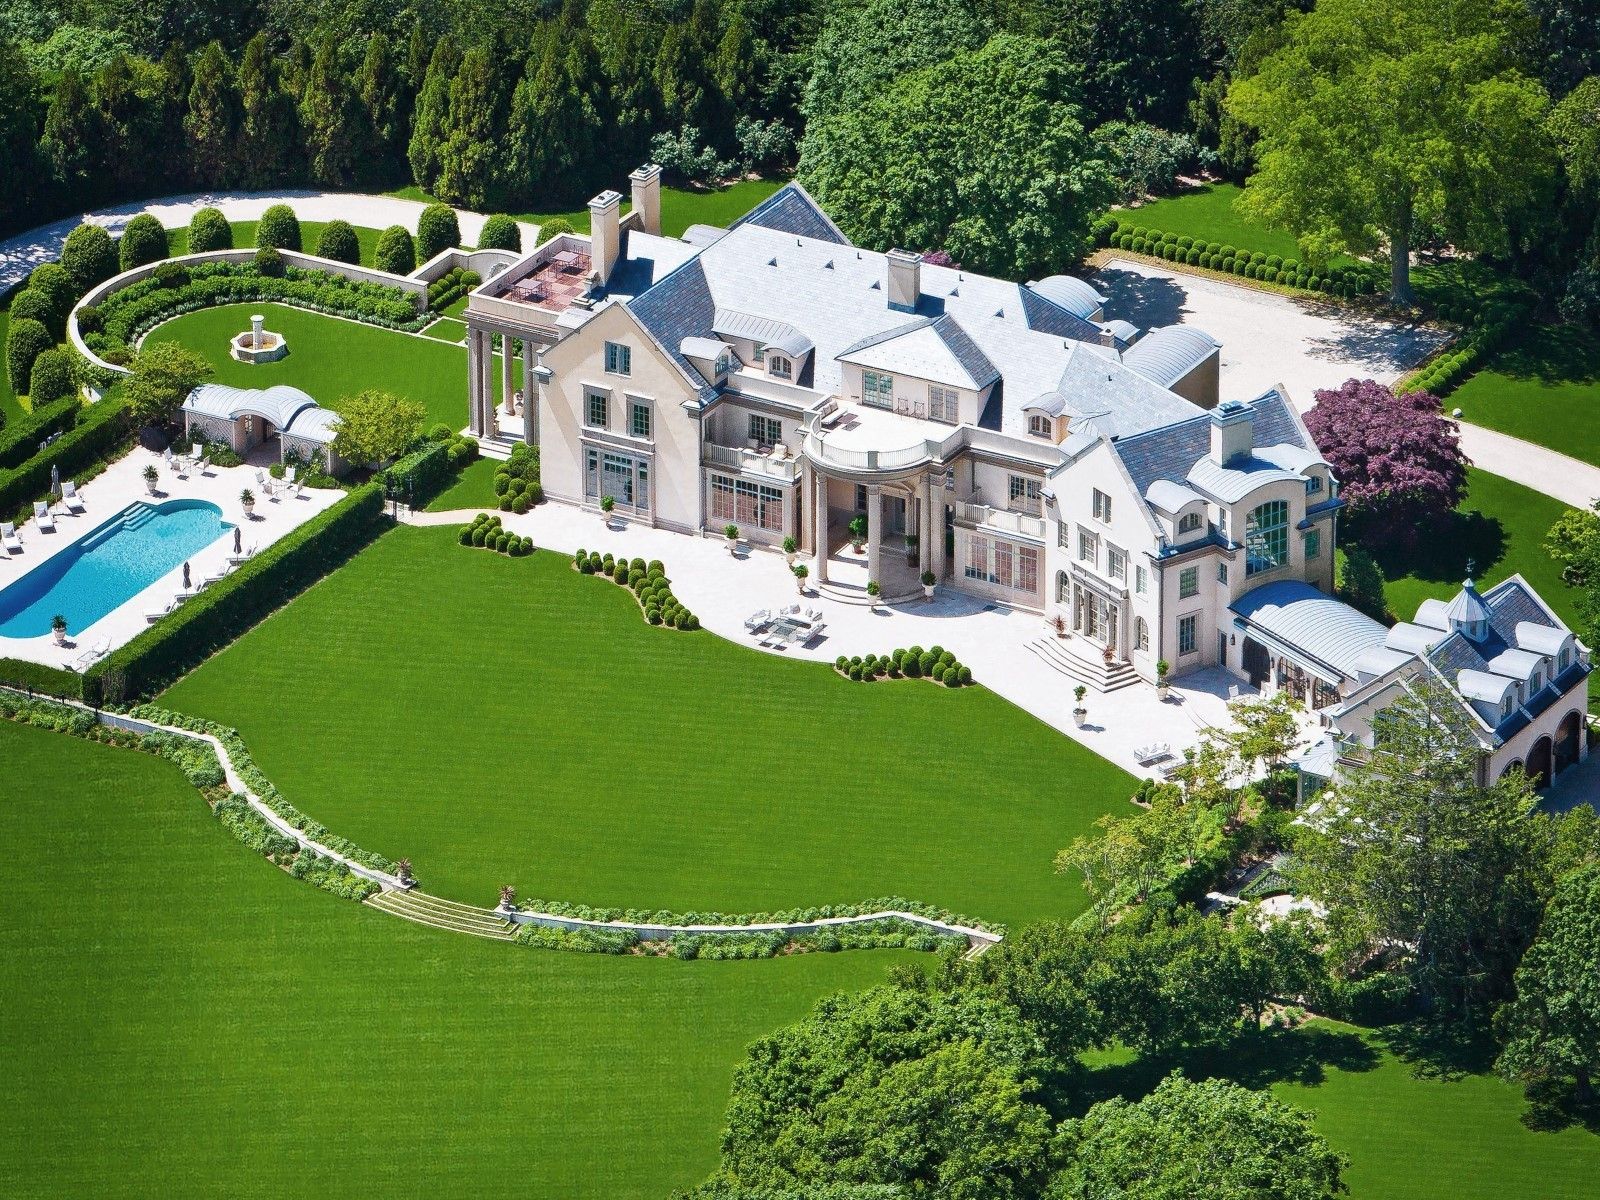 The 10 most expensive homes in London revealed